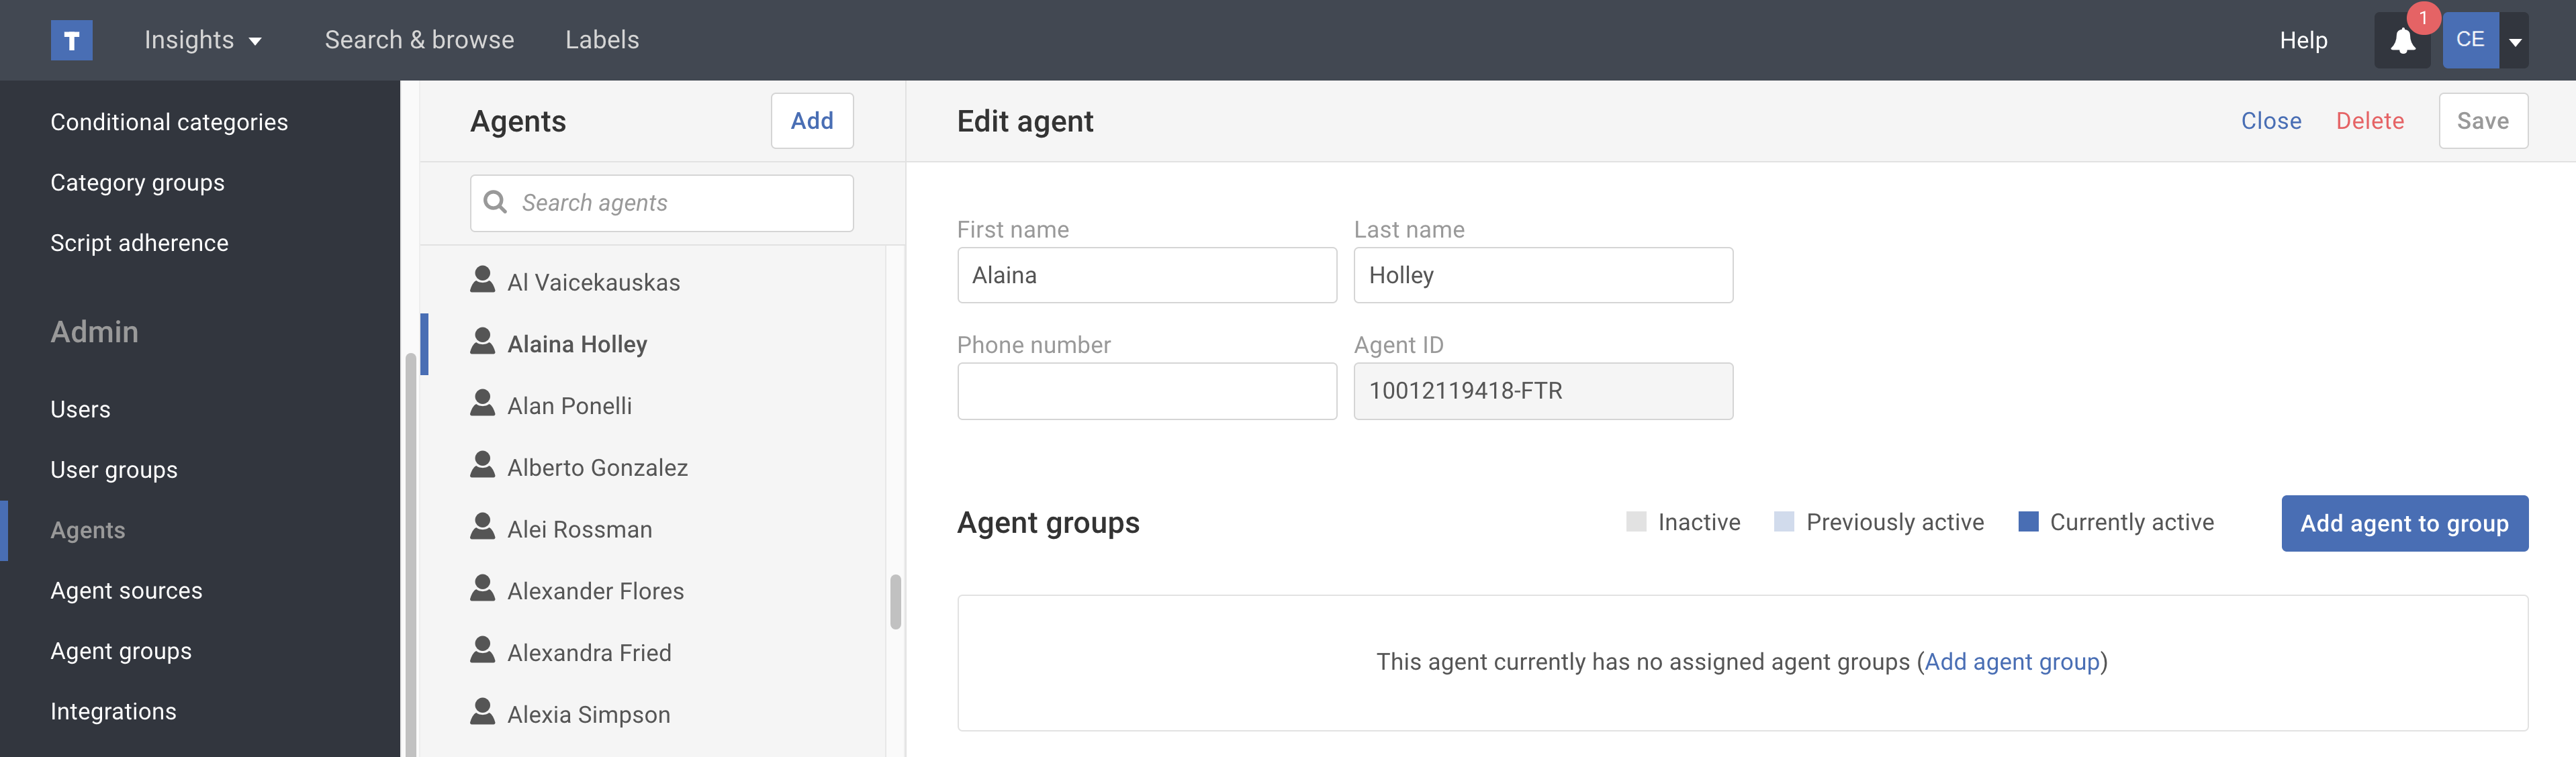 Select_the_name_of_the_agent_you_want_to_add_to_a_group_in_the_list_of_Agents___Tethr_customer_support.png